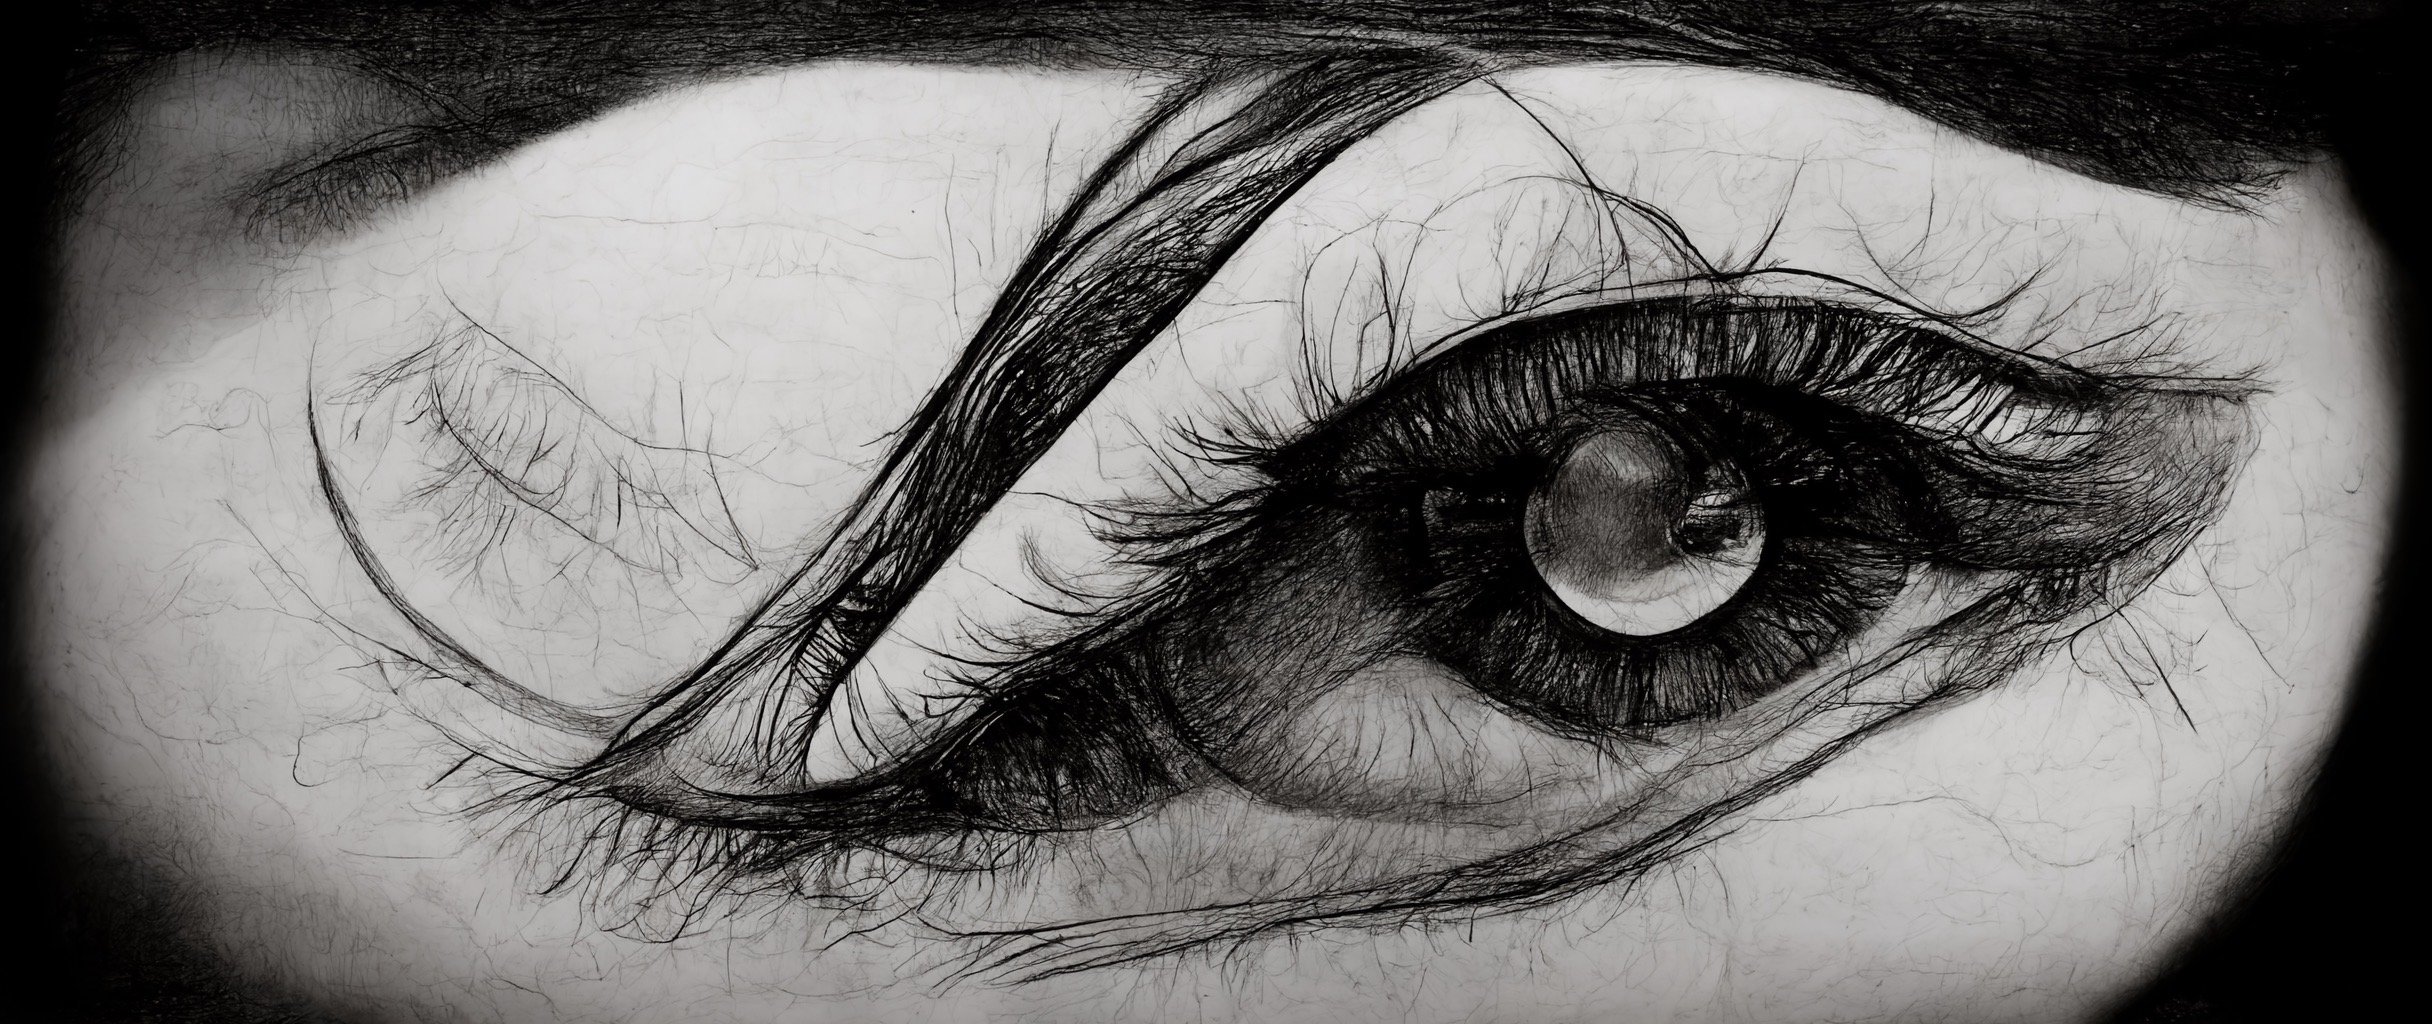 48f5cc81-bf48-465a-a880-be7dd26947d3_S3RAPH_httpss.mj.runR7JS4y__Pierre-Yves_Riveau_sketch_of_a_young_womans_eye._Graphite._Beautiful._cinematic.JPG